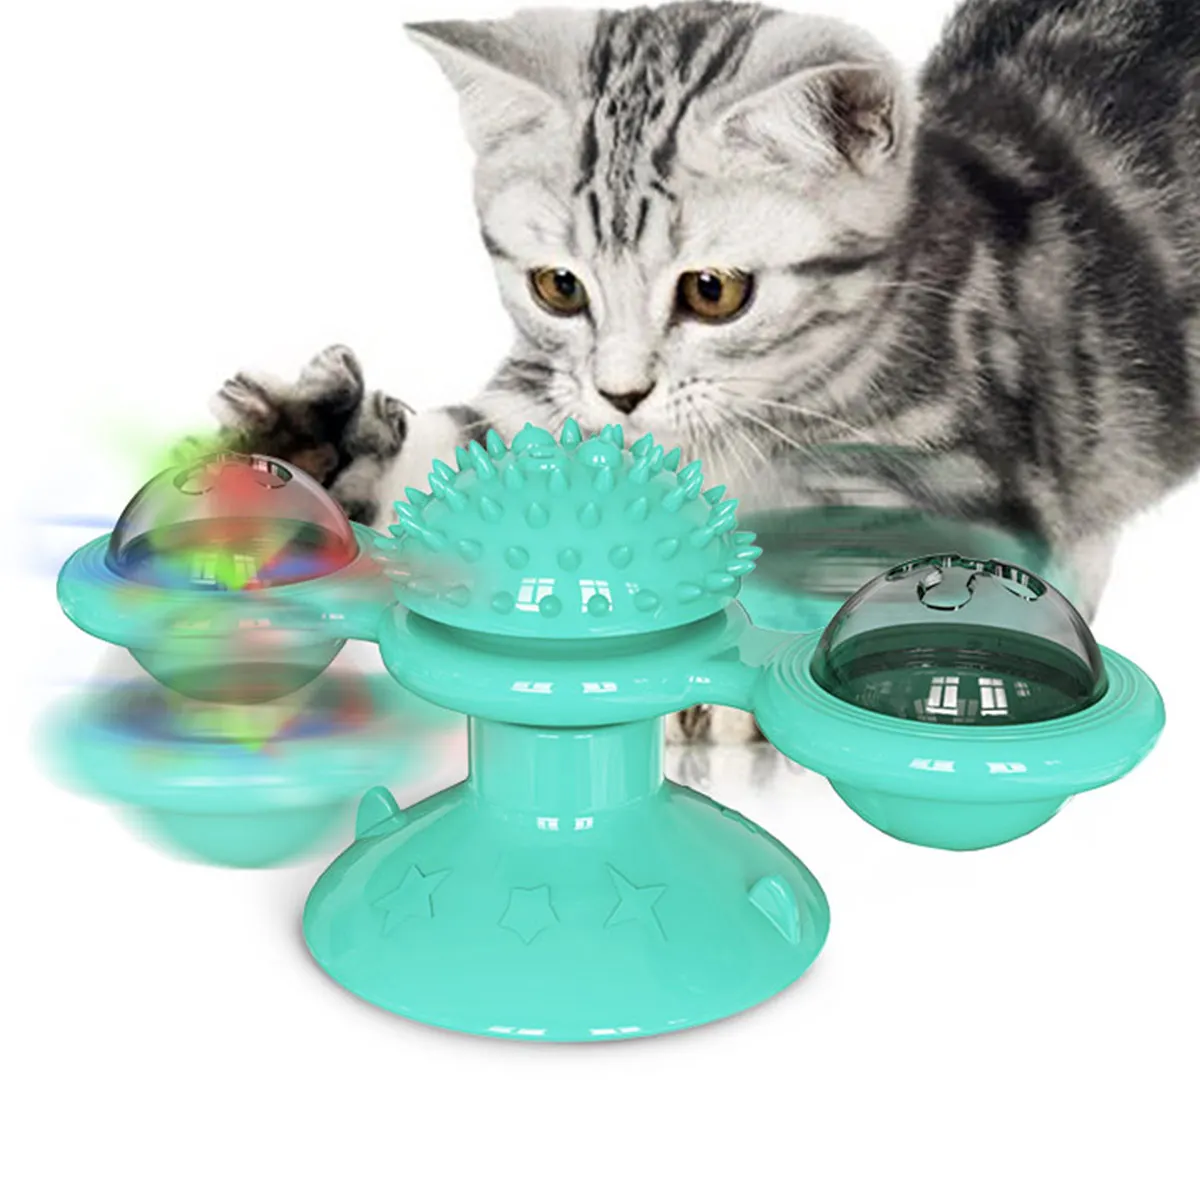 

High Quality TPR Plastic Blue Green Yellow Turntable Windmill Spin Glow Ball Cat Interactive Toy, Lake blue, green, yellow